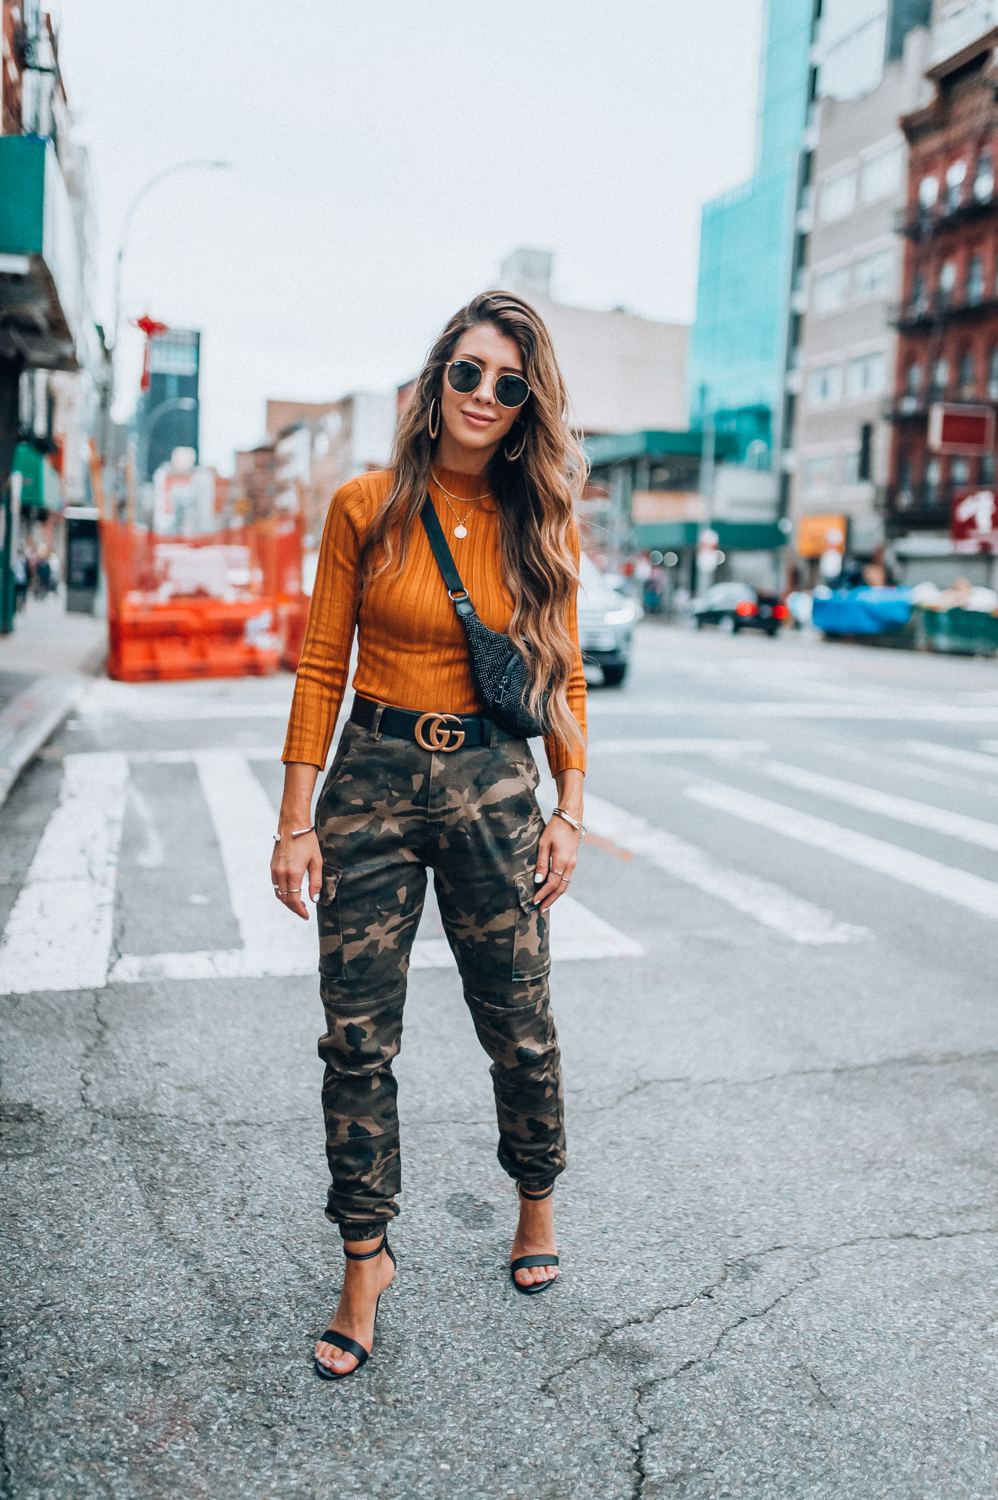 New York Fashion Week Trends: Camo pants featured by popular San Francisco fashion blogger, The Girl in the Yellow Dress